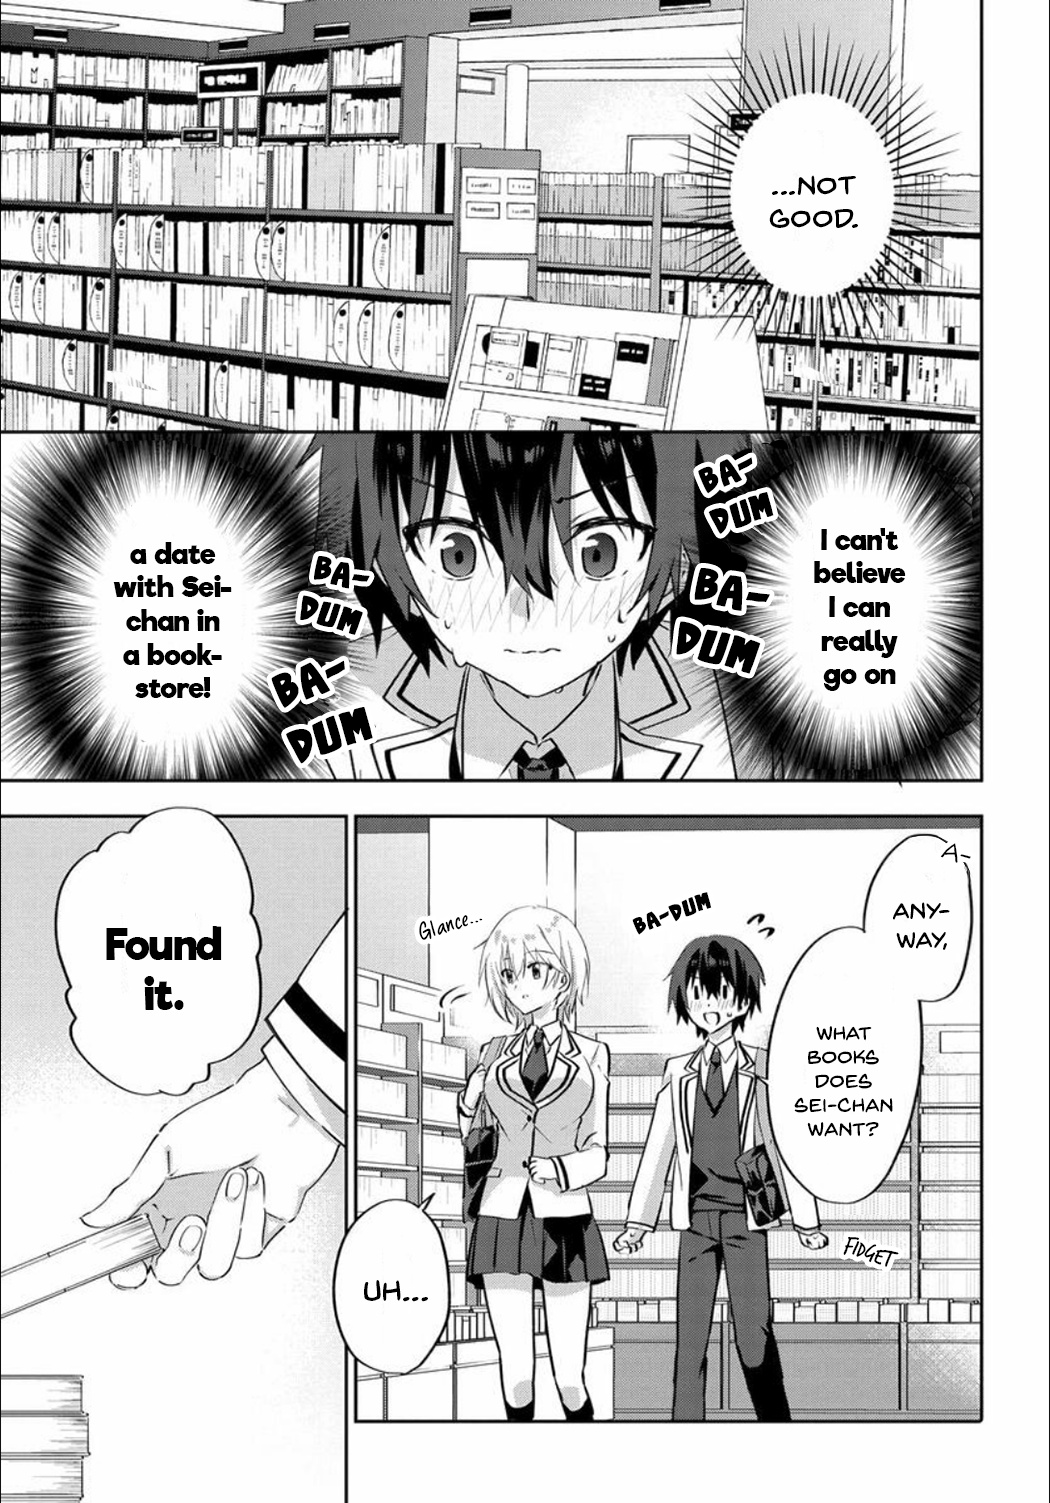 Since I’Ve Entered The World Of Romantic Comedy Manga, I’Ll Do My Best To Make The Losing Heroine Happy - Page 1